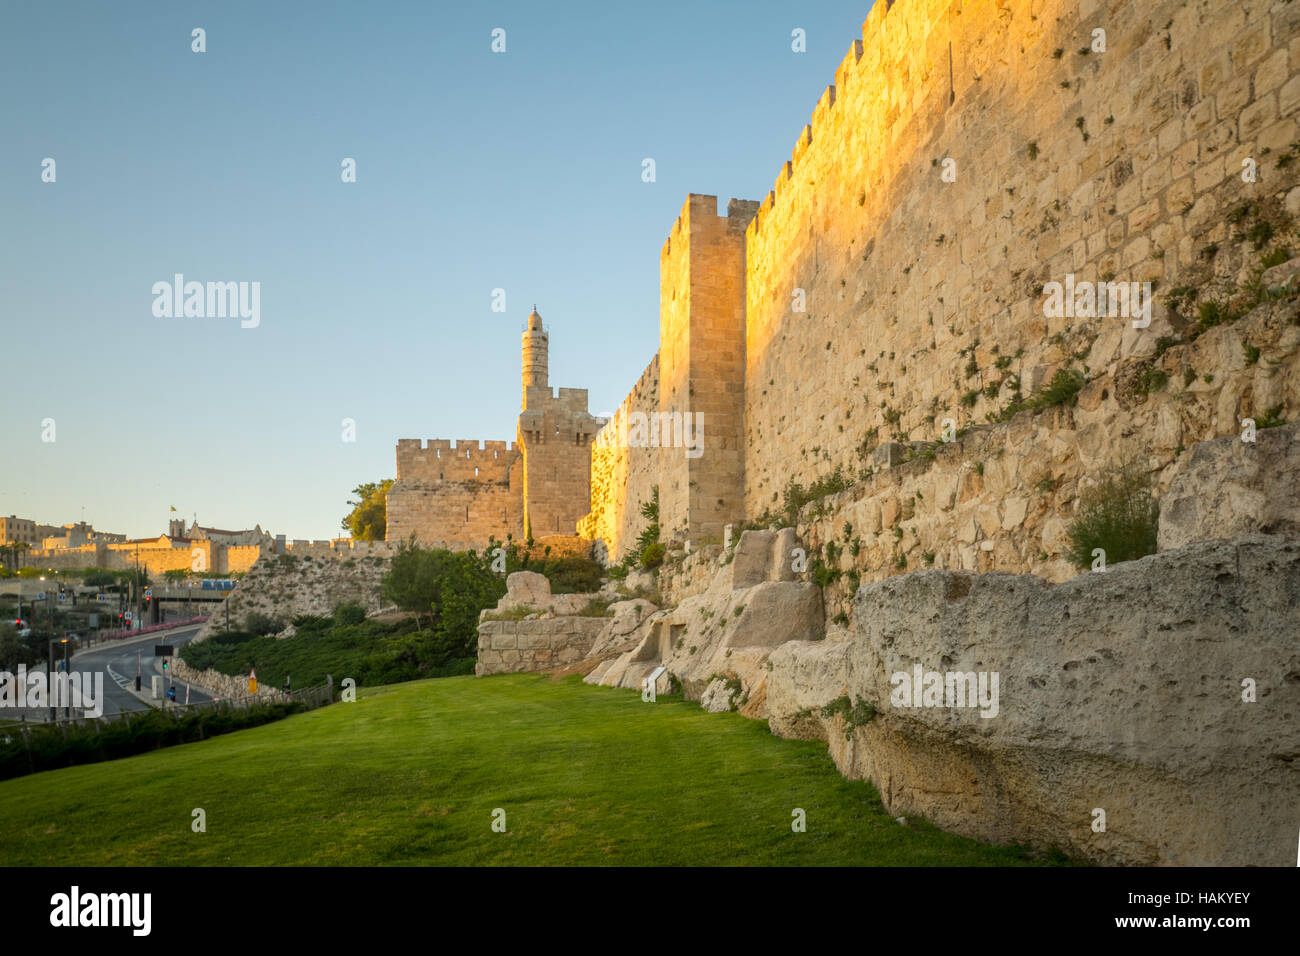 Sunset view of the walls of the old city (south - west section), with the tower of David, in Jerusalem, Israel Stock Photo